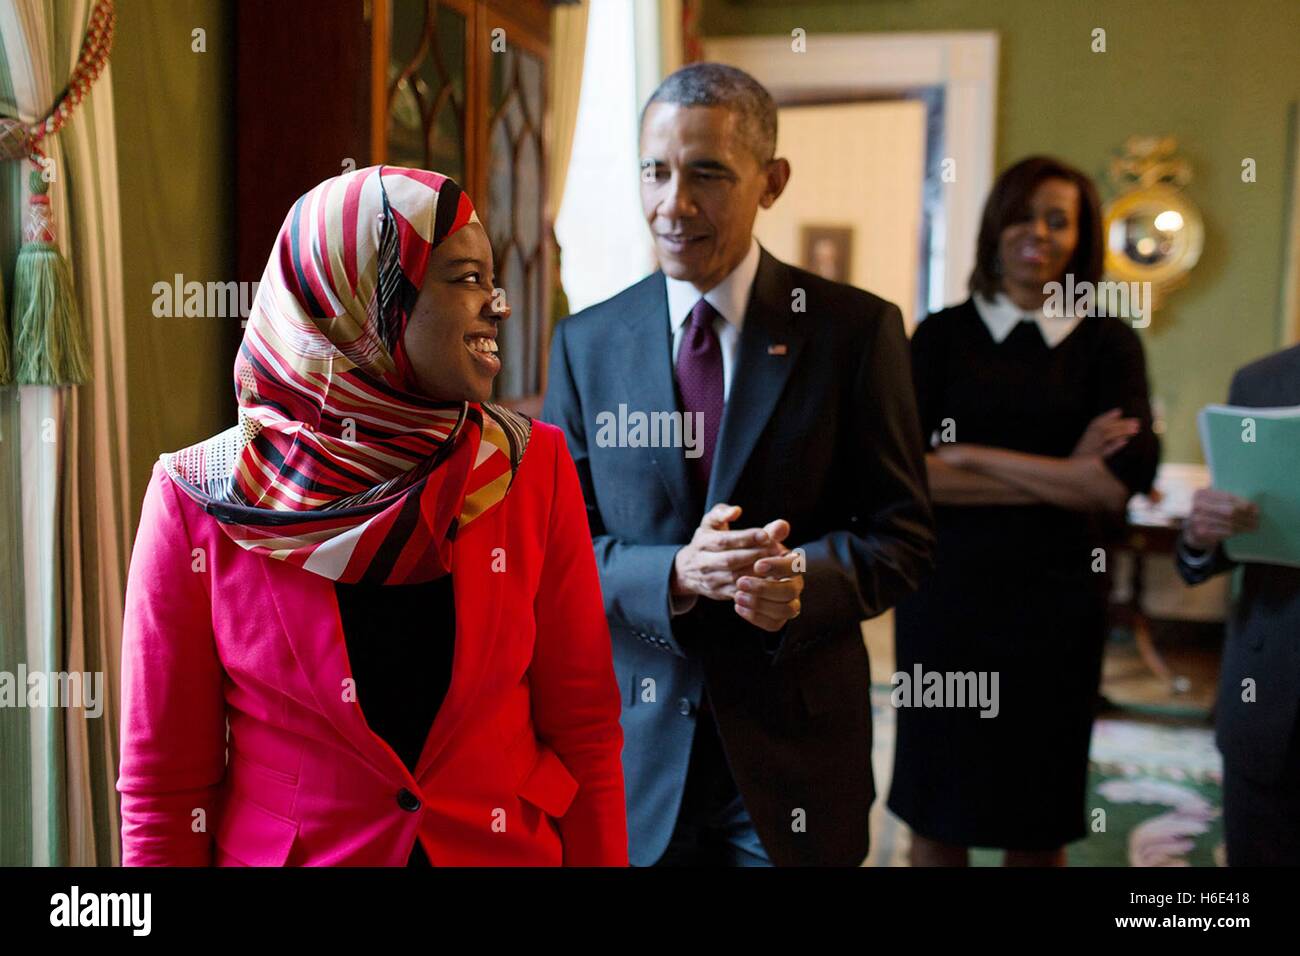 Harvard student Saheela Ibraheem looks back at U.S. President Barack Obama and First Lady Michelle Obama as she prepares to introduce them at a reception celebrating Black History Month in the White House Green Room February 26, 2015 in Washington, DC. Stock Photo